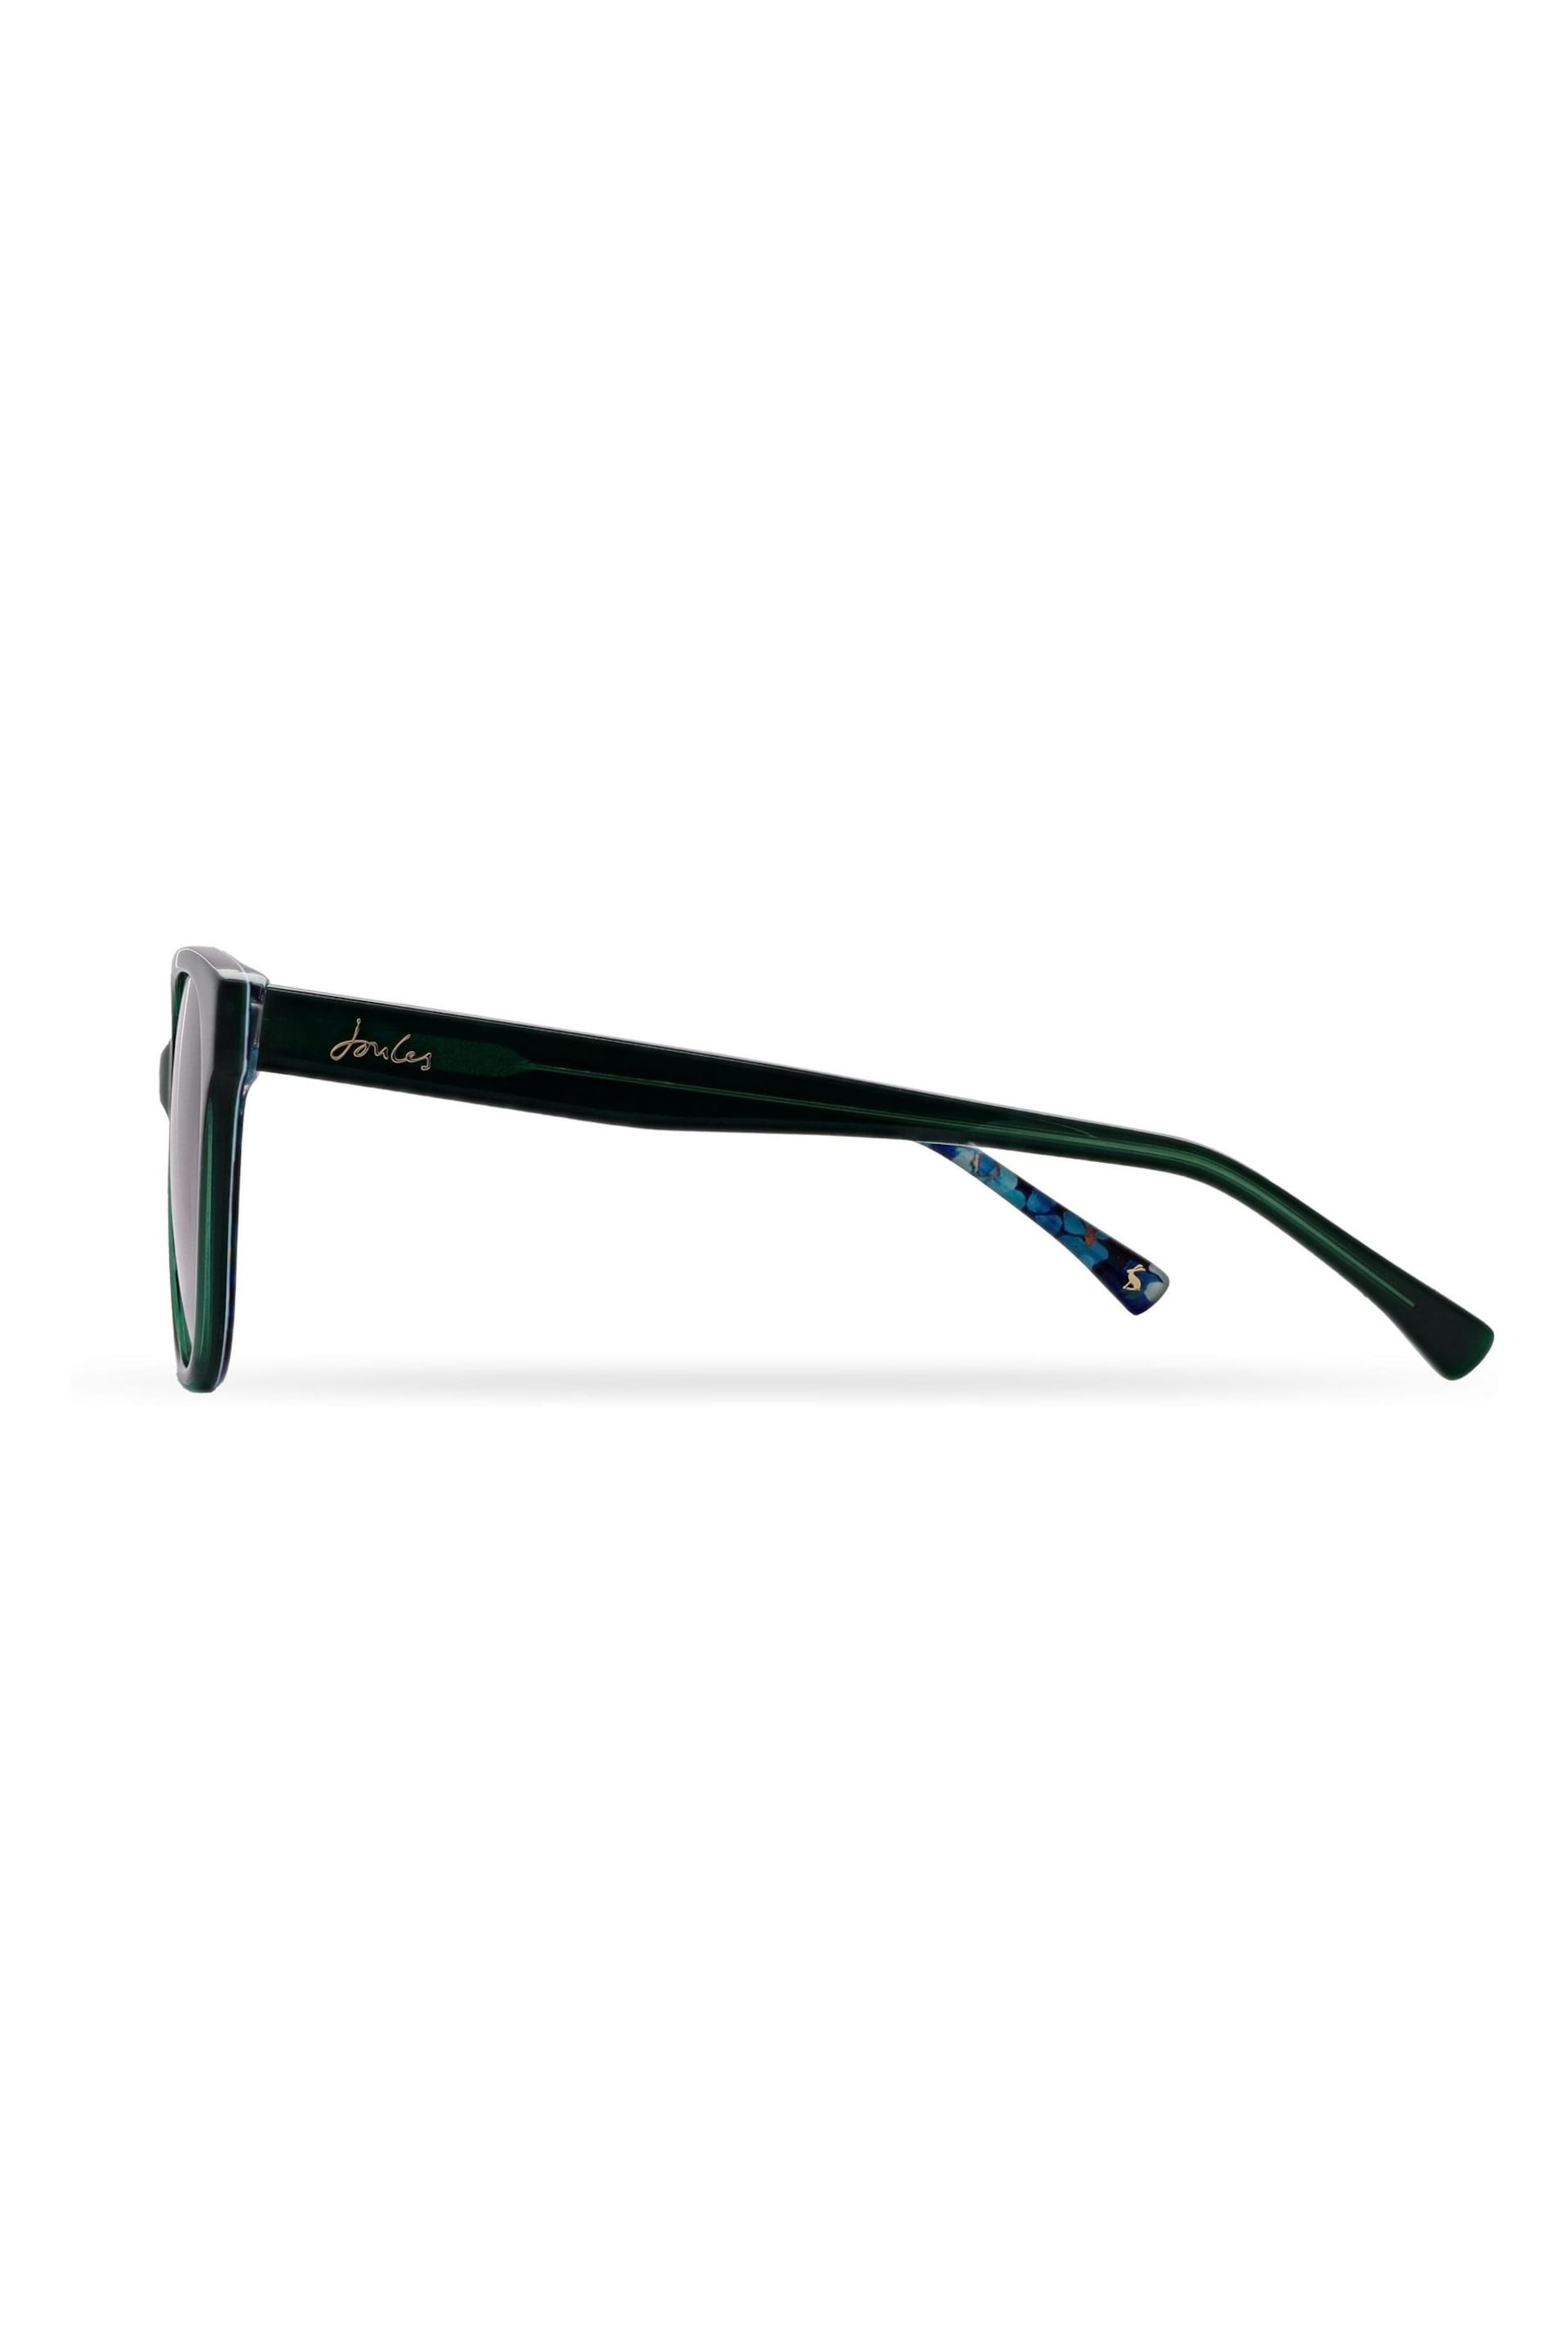 Joules Green Ivy JS7099 Sunglasses - Image 3 of 4